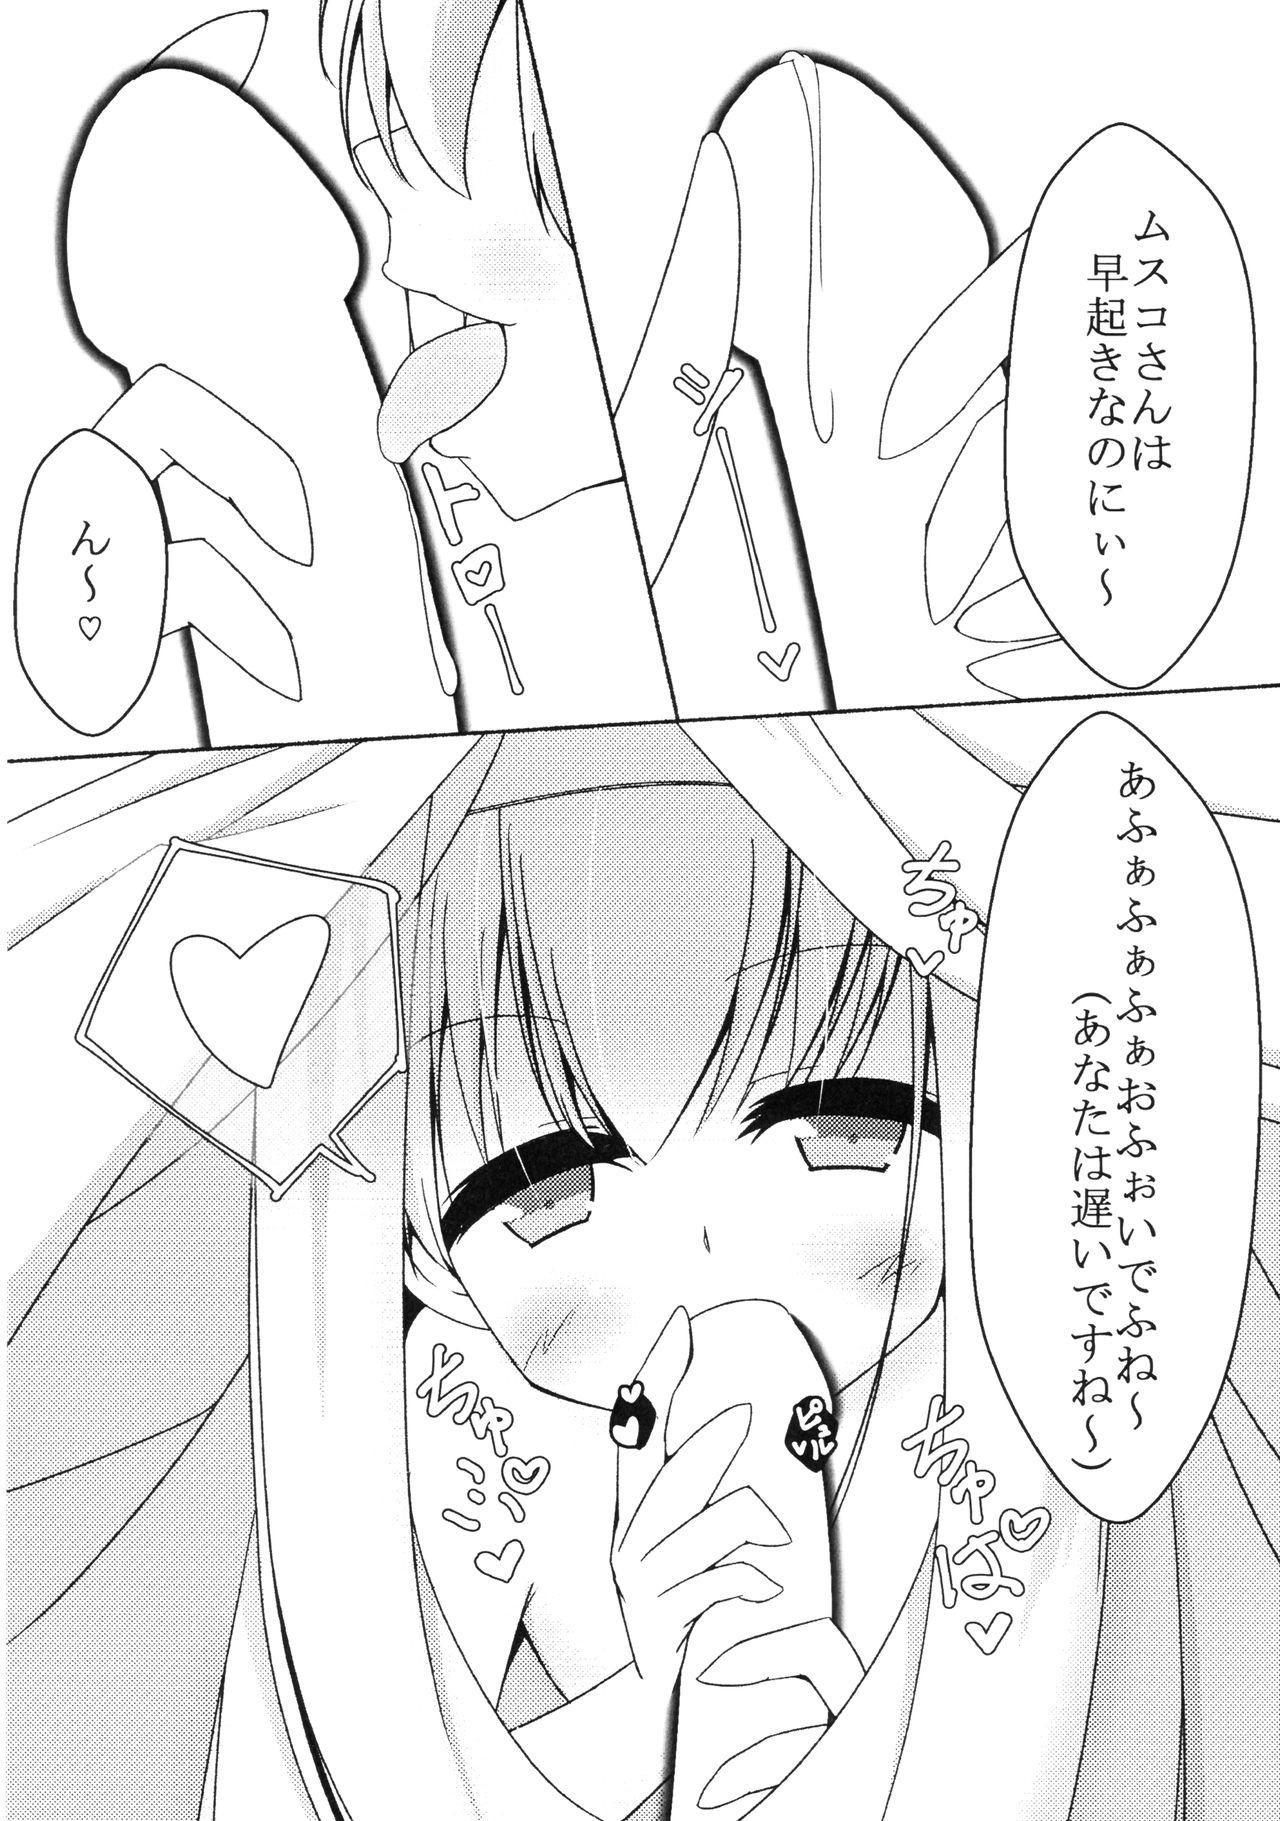 Massage Sex L♂VE!&L♀VE!! EVERYDAY・EVERYTIME - Selector infected wixoss Creampies - Page 5